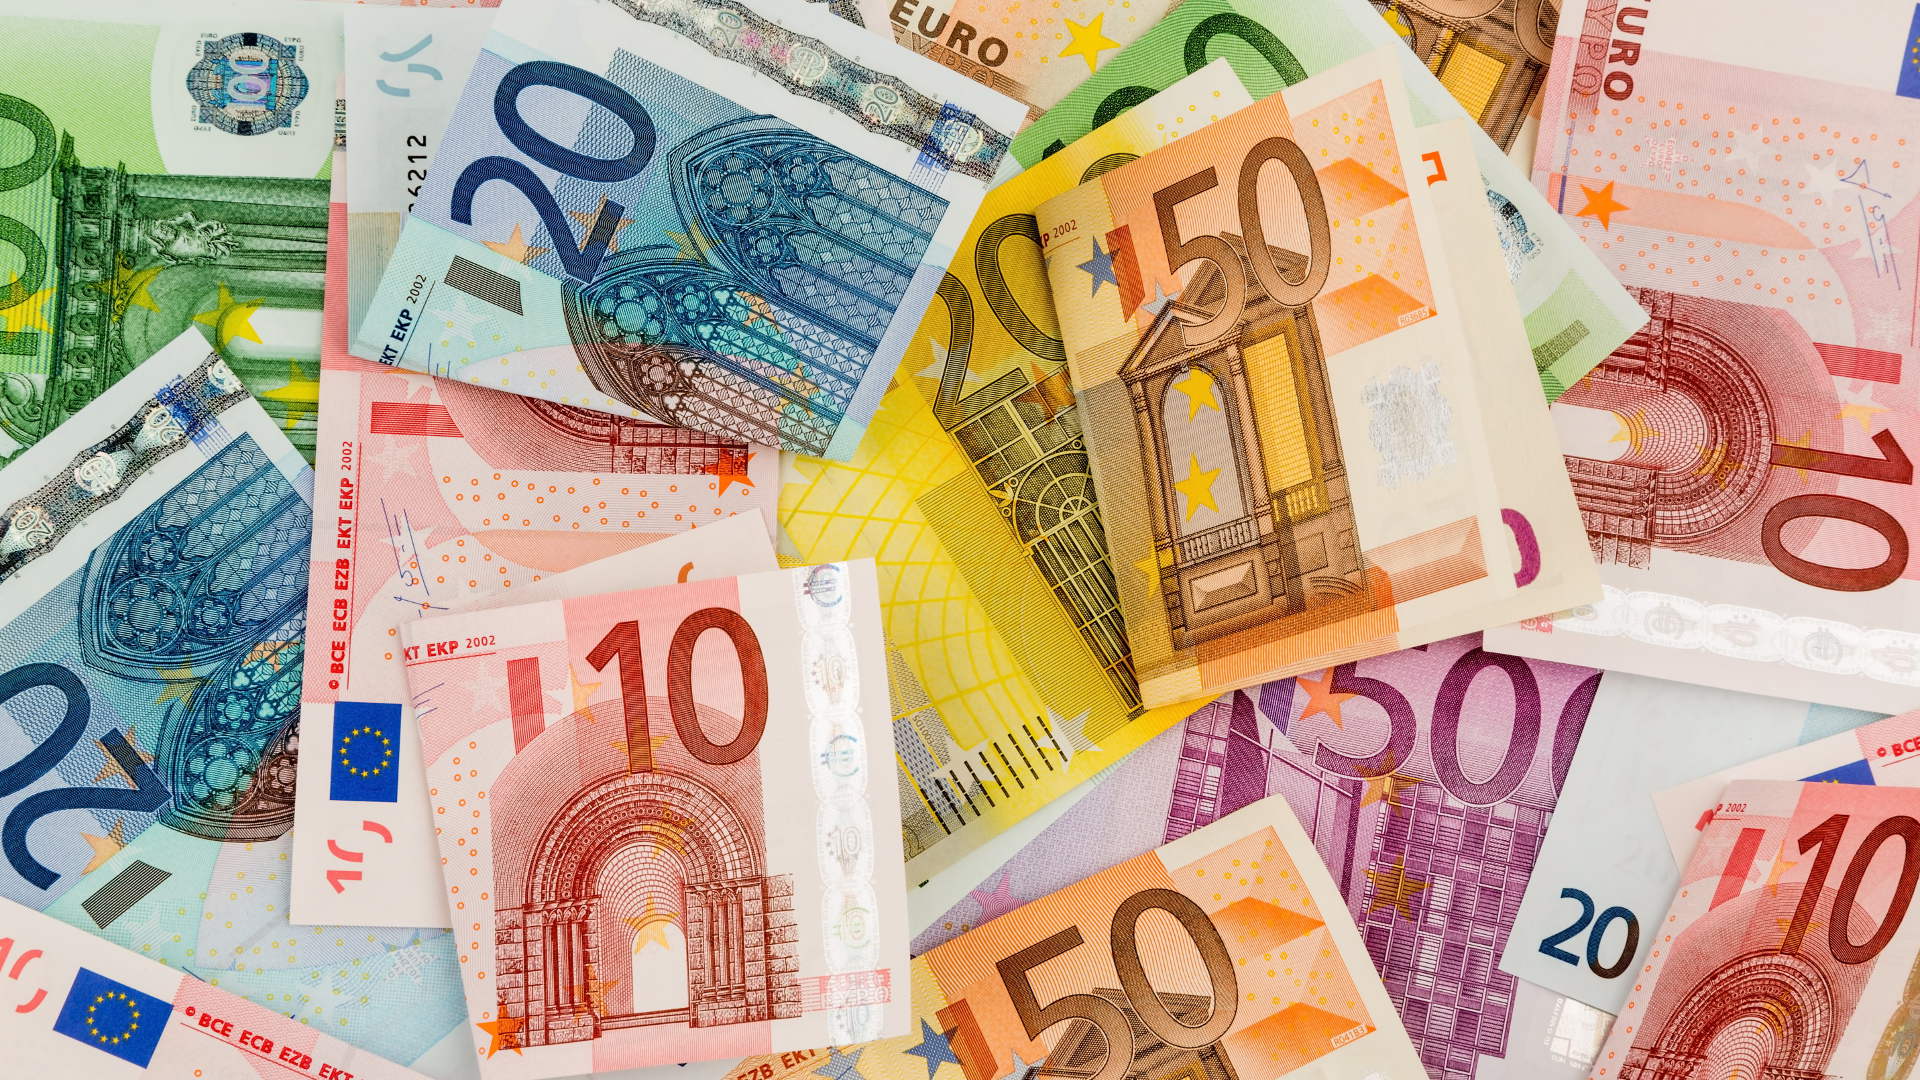 Does Polymer Technology Make Plastic Banknotes Counterfeit-Proof?